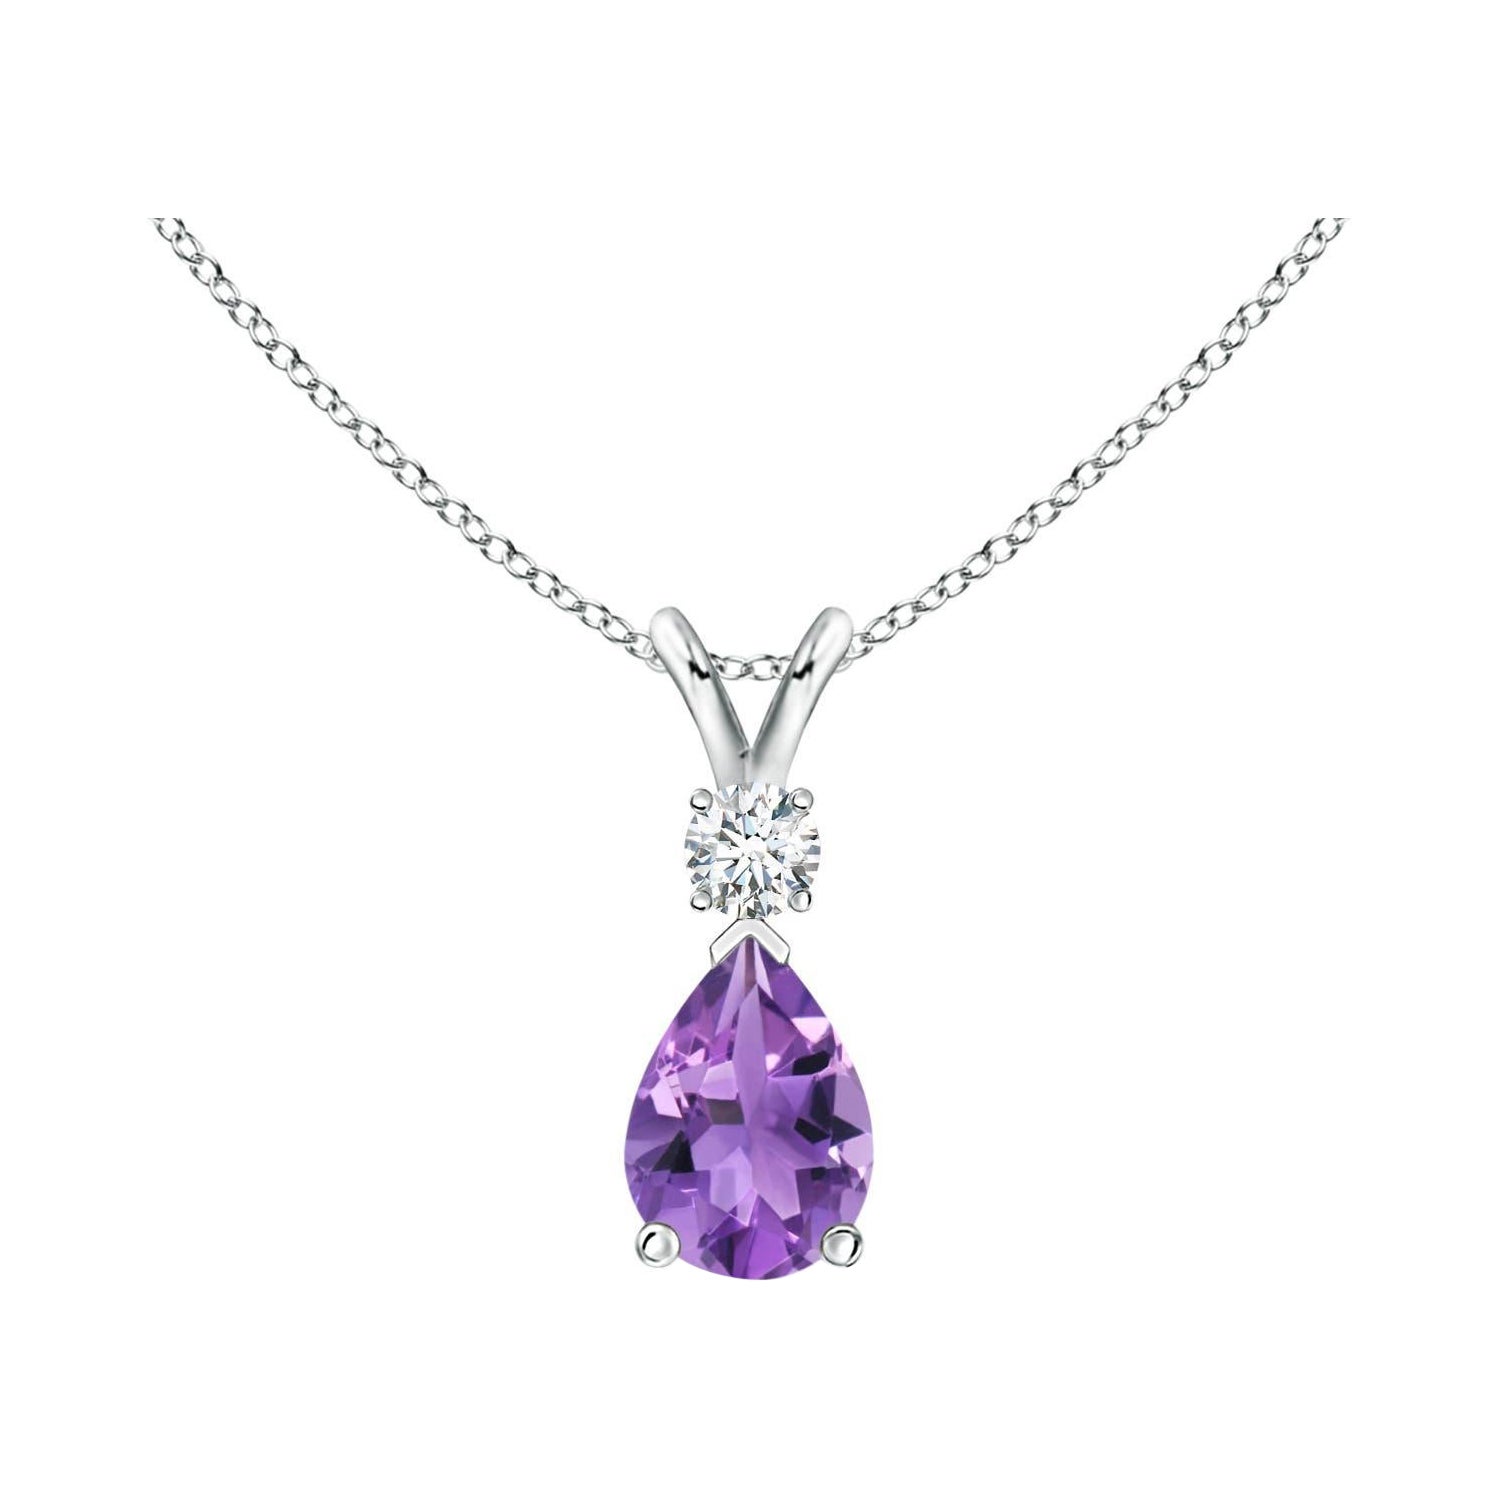 Natural 0.60ct Amethyst Teardrop Pendant with Diamond in 14K White Gold